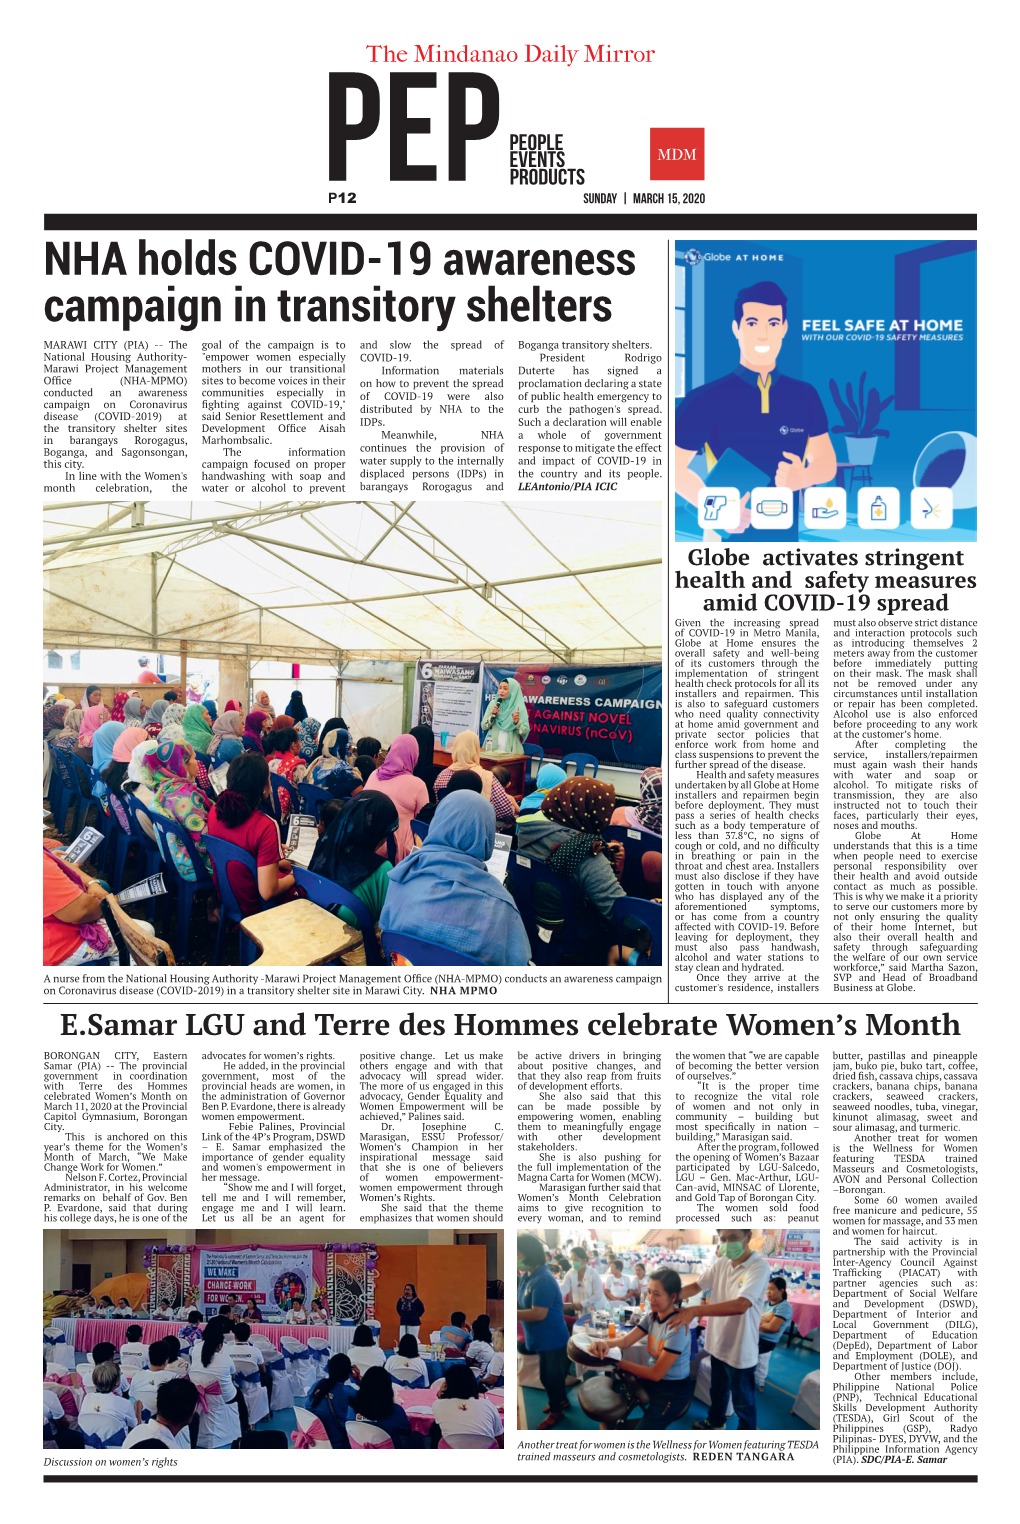 NHA Holds COVID-19 Awareness Campaign in Transitory Shelters MARAWI CITY (PIA) -- the Goal of the Campaign Is to and Slow the Spread of Boganga Transitory Shelters